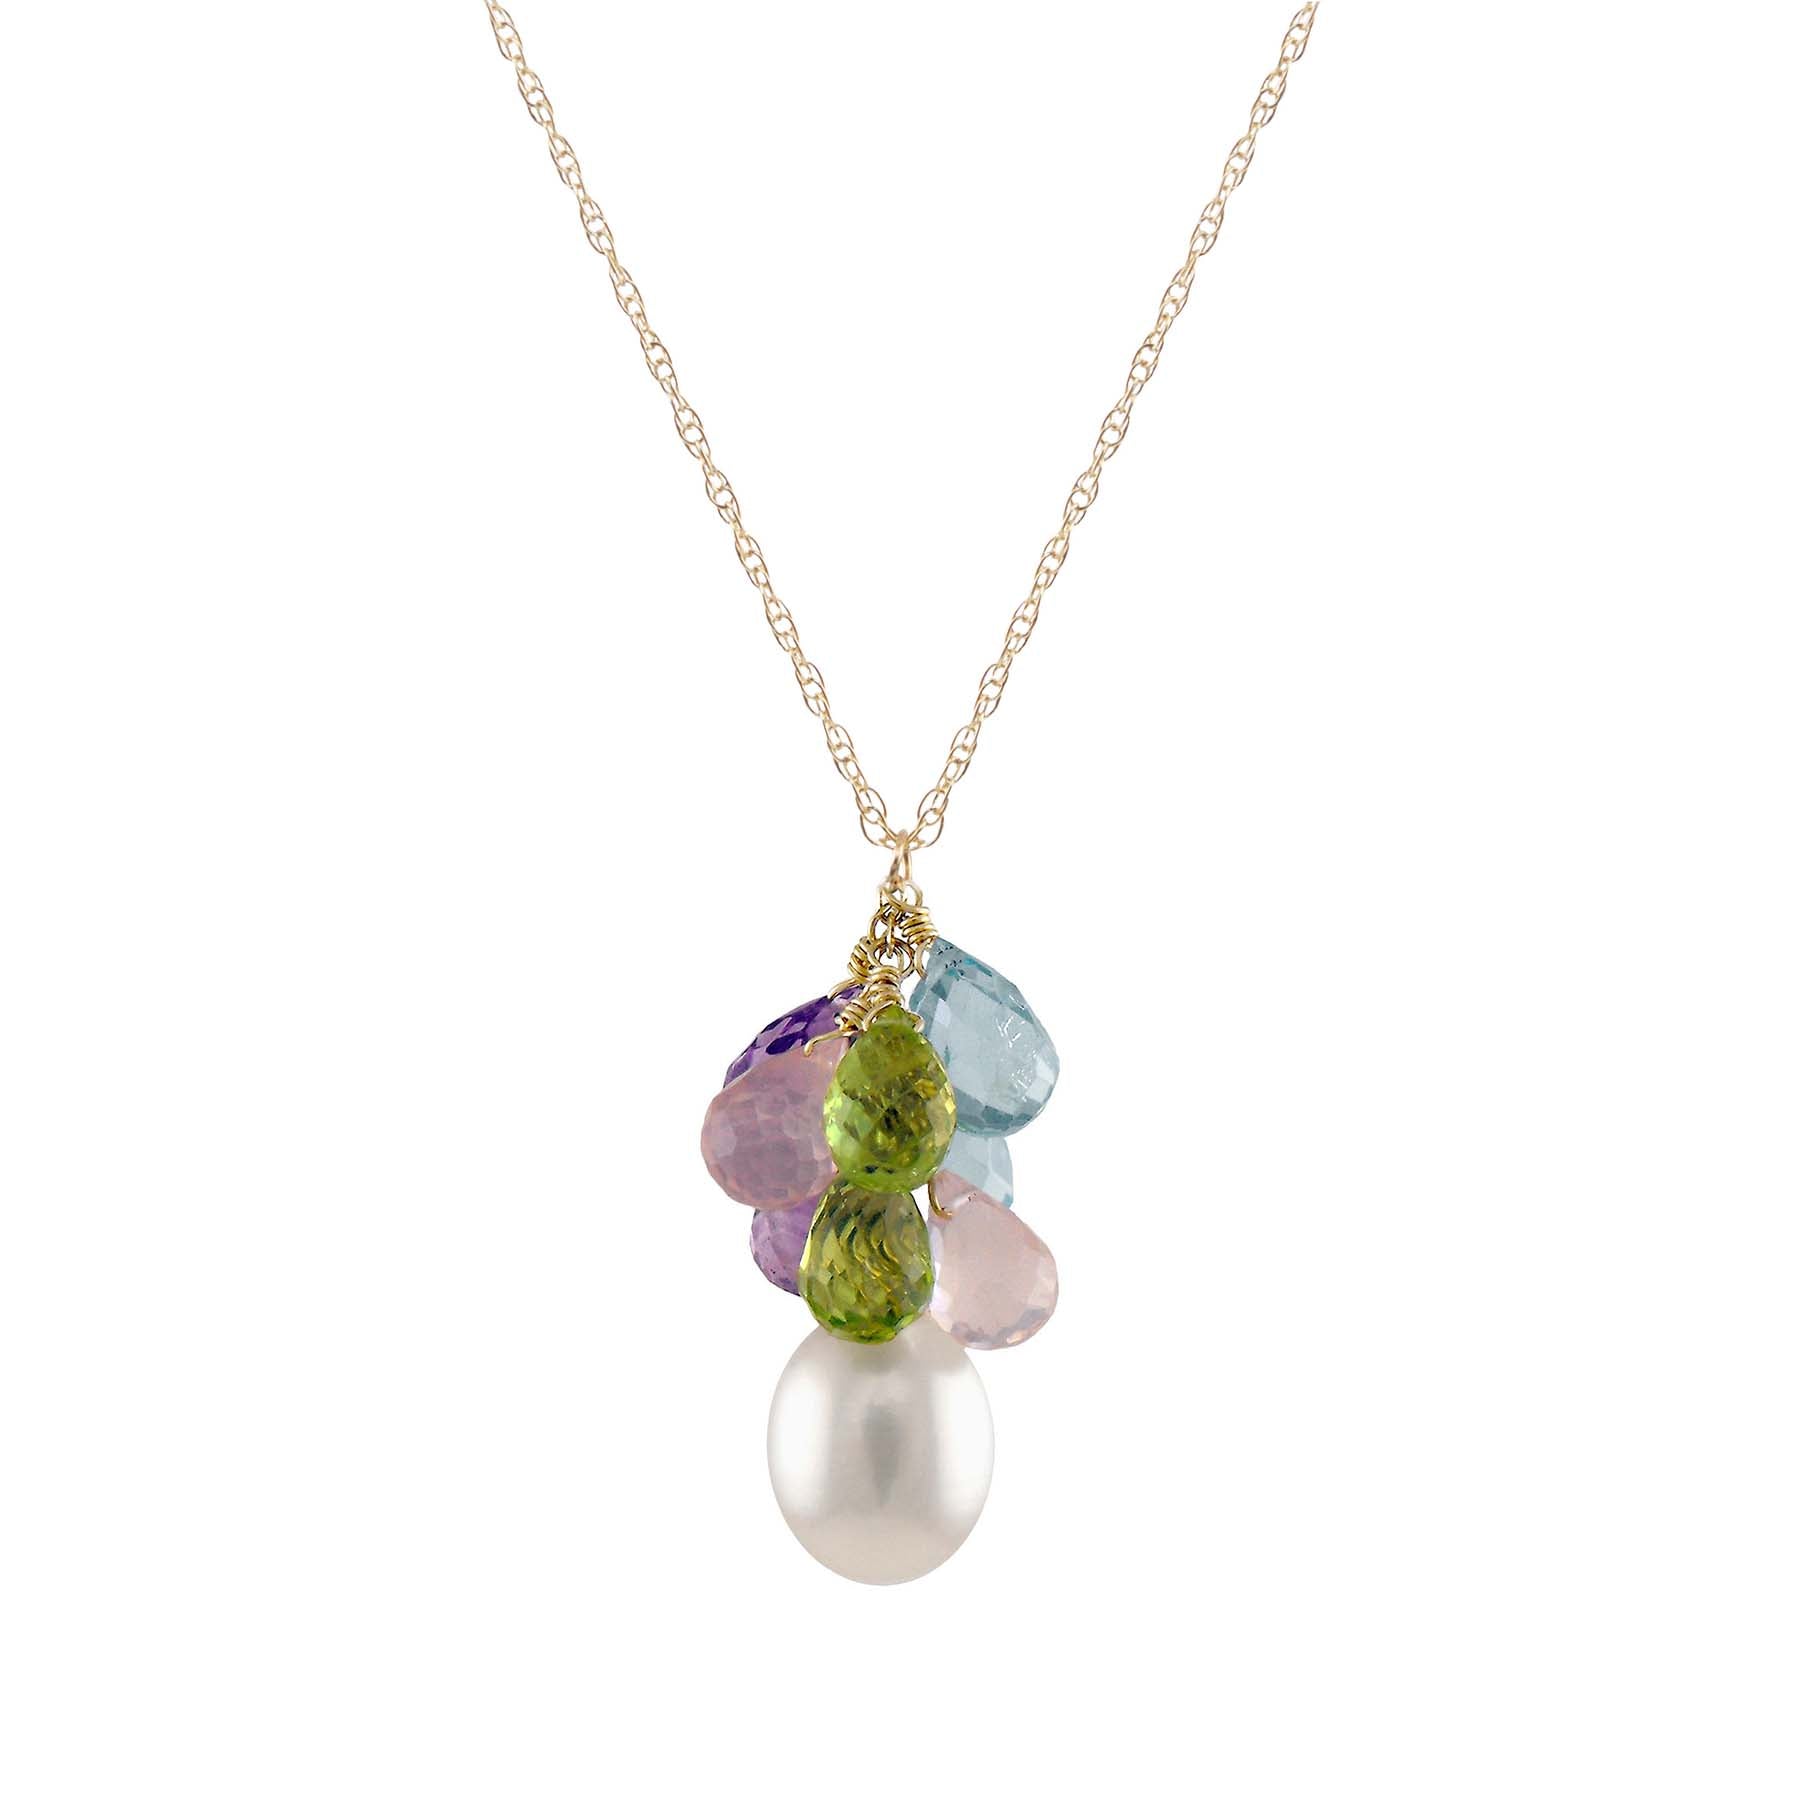 14k White Freshwater Pearl, Blue Topaz, Peridot, Rose Quartz and Amethyst Necklace 17"